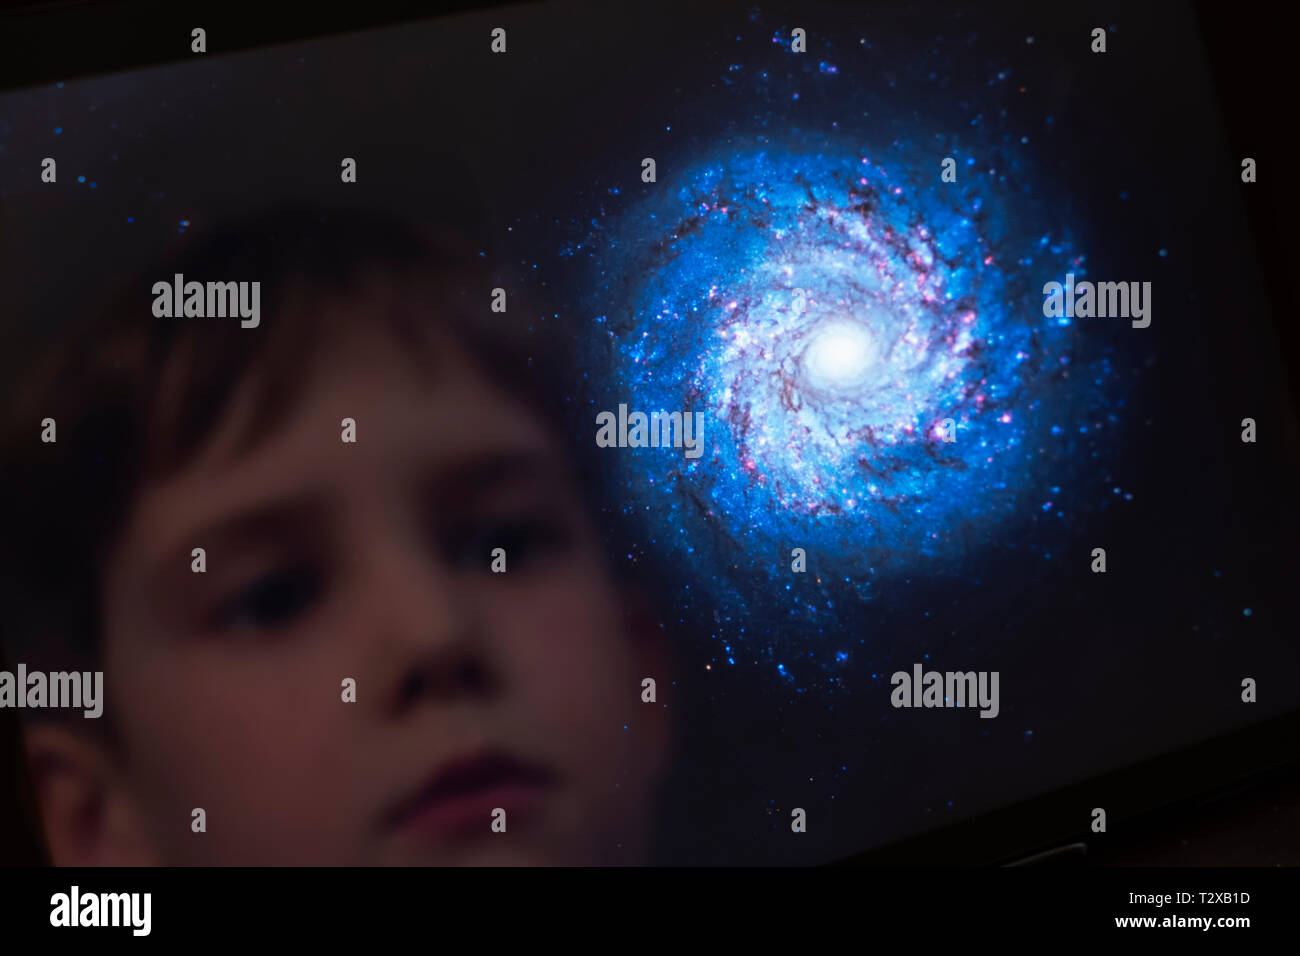 Reflection of a young boy looking at a galaxy on a tablet computer Stock Photo